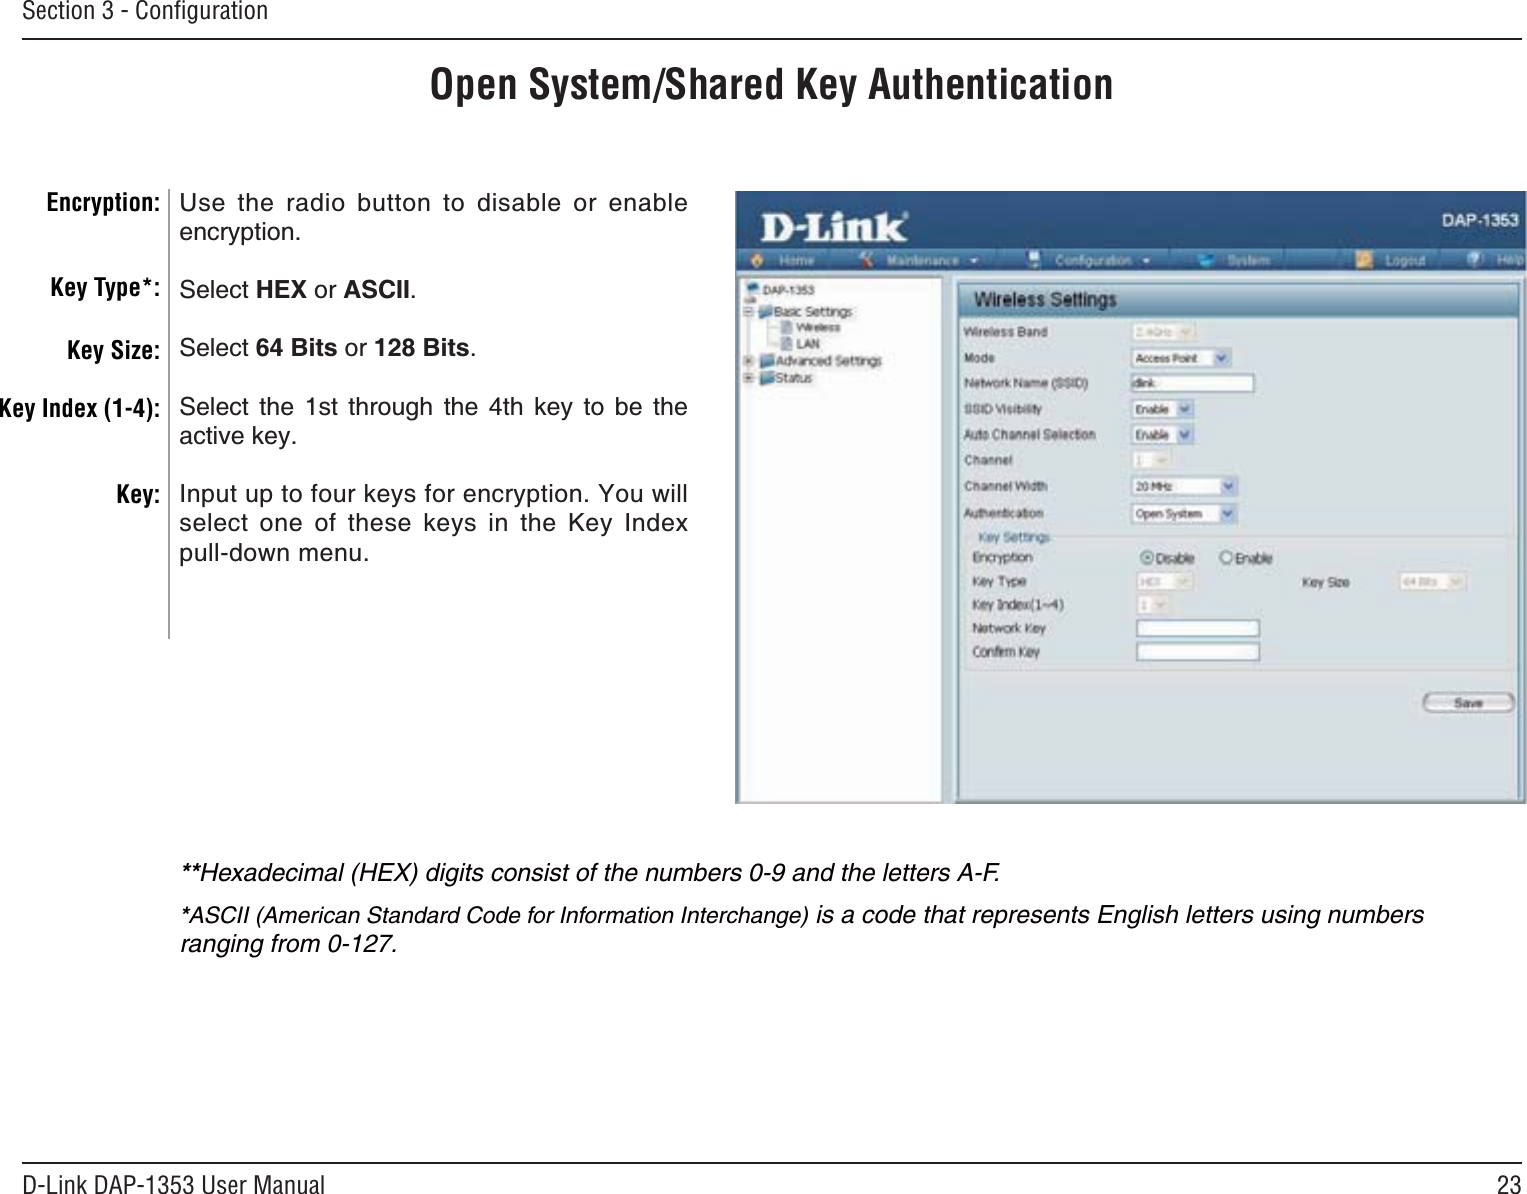 23D-Link DAP-1353 User ManualSection 3 - ConﬁgurationOpen System/Shared Key Authentication Encryption:Key Type*:Key Size:Key Index (1-4):Key:7UG VJG TCFKQ DWVVQP VQ FKUCDNG QT GPCDNGencryption.Select HEX or ASCII.Select 64 Bits or 128 Bits.5GNGEV VJG UV VJTQWIJ VJG VJ MG[ VQ DG VJGactive key.Input up to four keys for encryption. You will select one of these keys in the Key Index pull-down menu.**Hexadecimal (HEX) digits consist of the numbers 0-9 and the letters A-F.*ASCII (American Standard Code for Information Interchange) is a code that represents English letters using numbers ranging from 0-127.